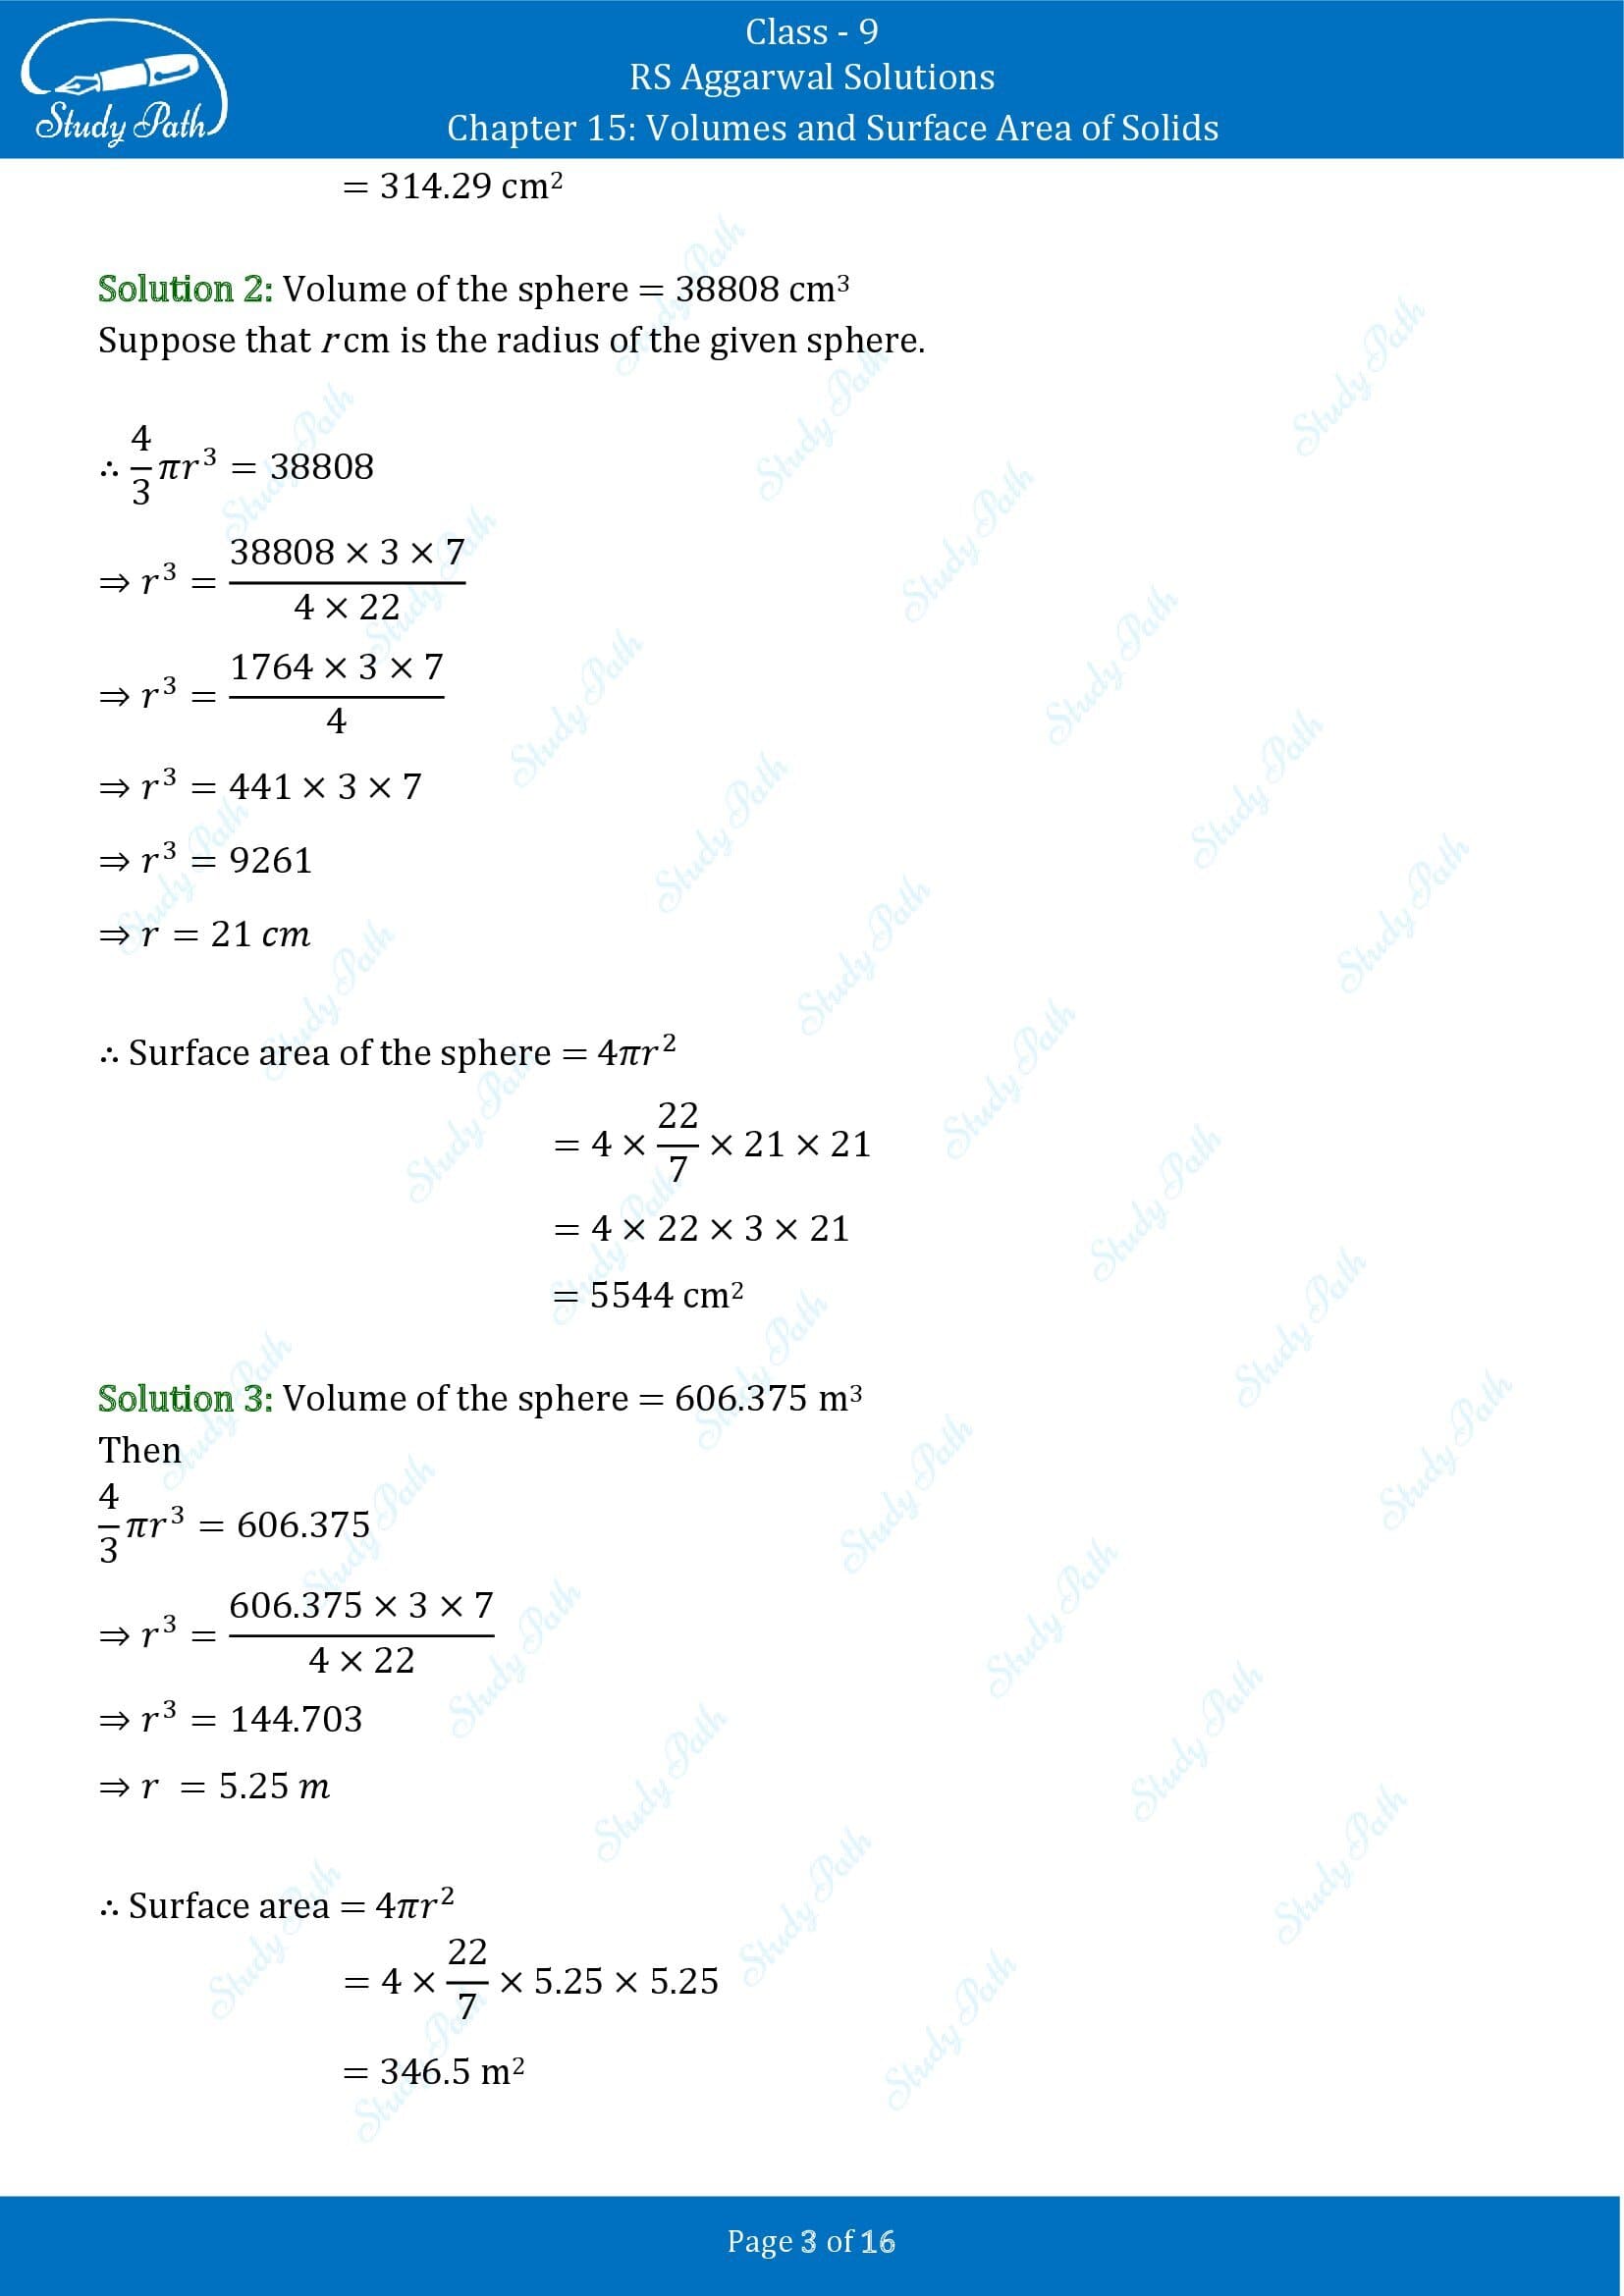 RS Aggarwal Solutions Class 9 Chapter 15 Volumes and Surface Area of Solids Exercise 15D 00003